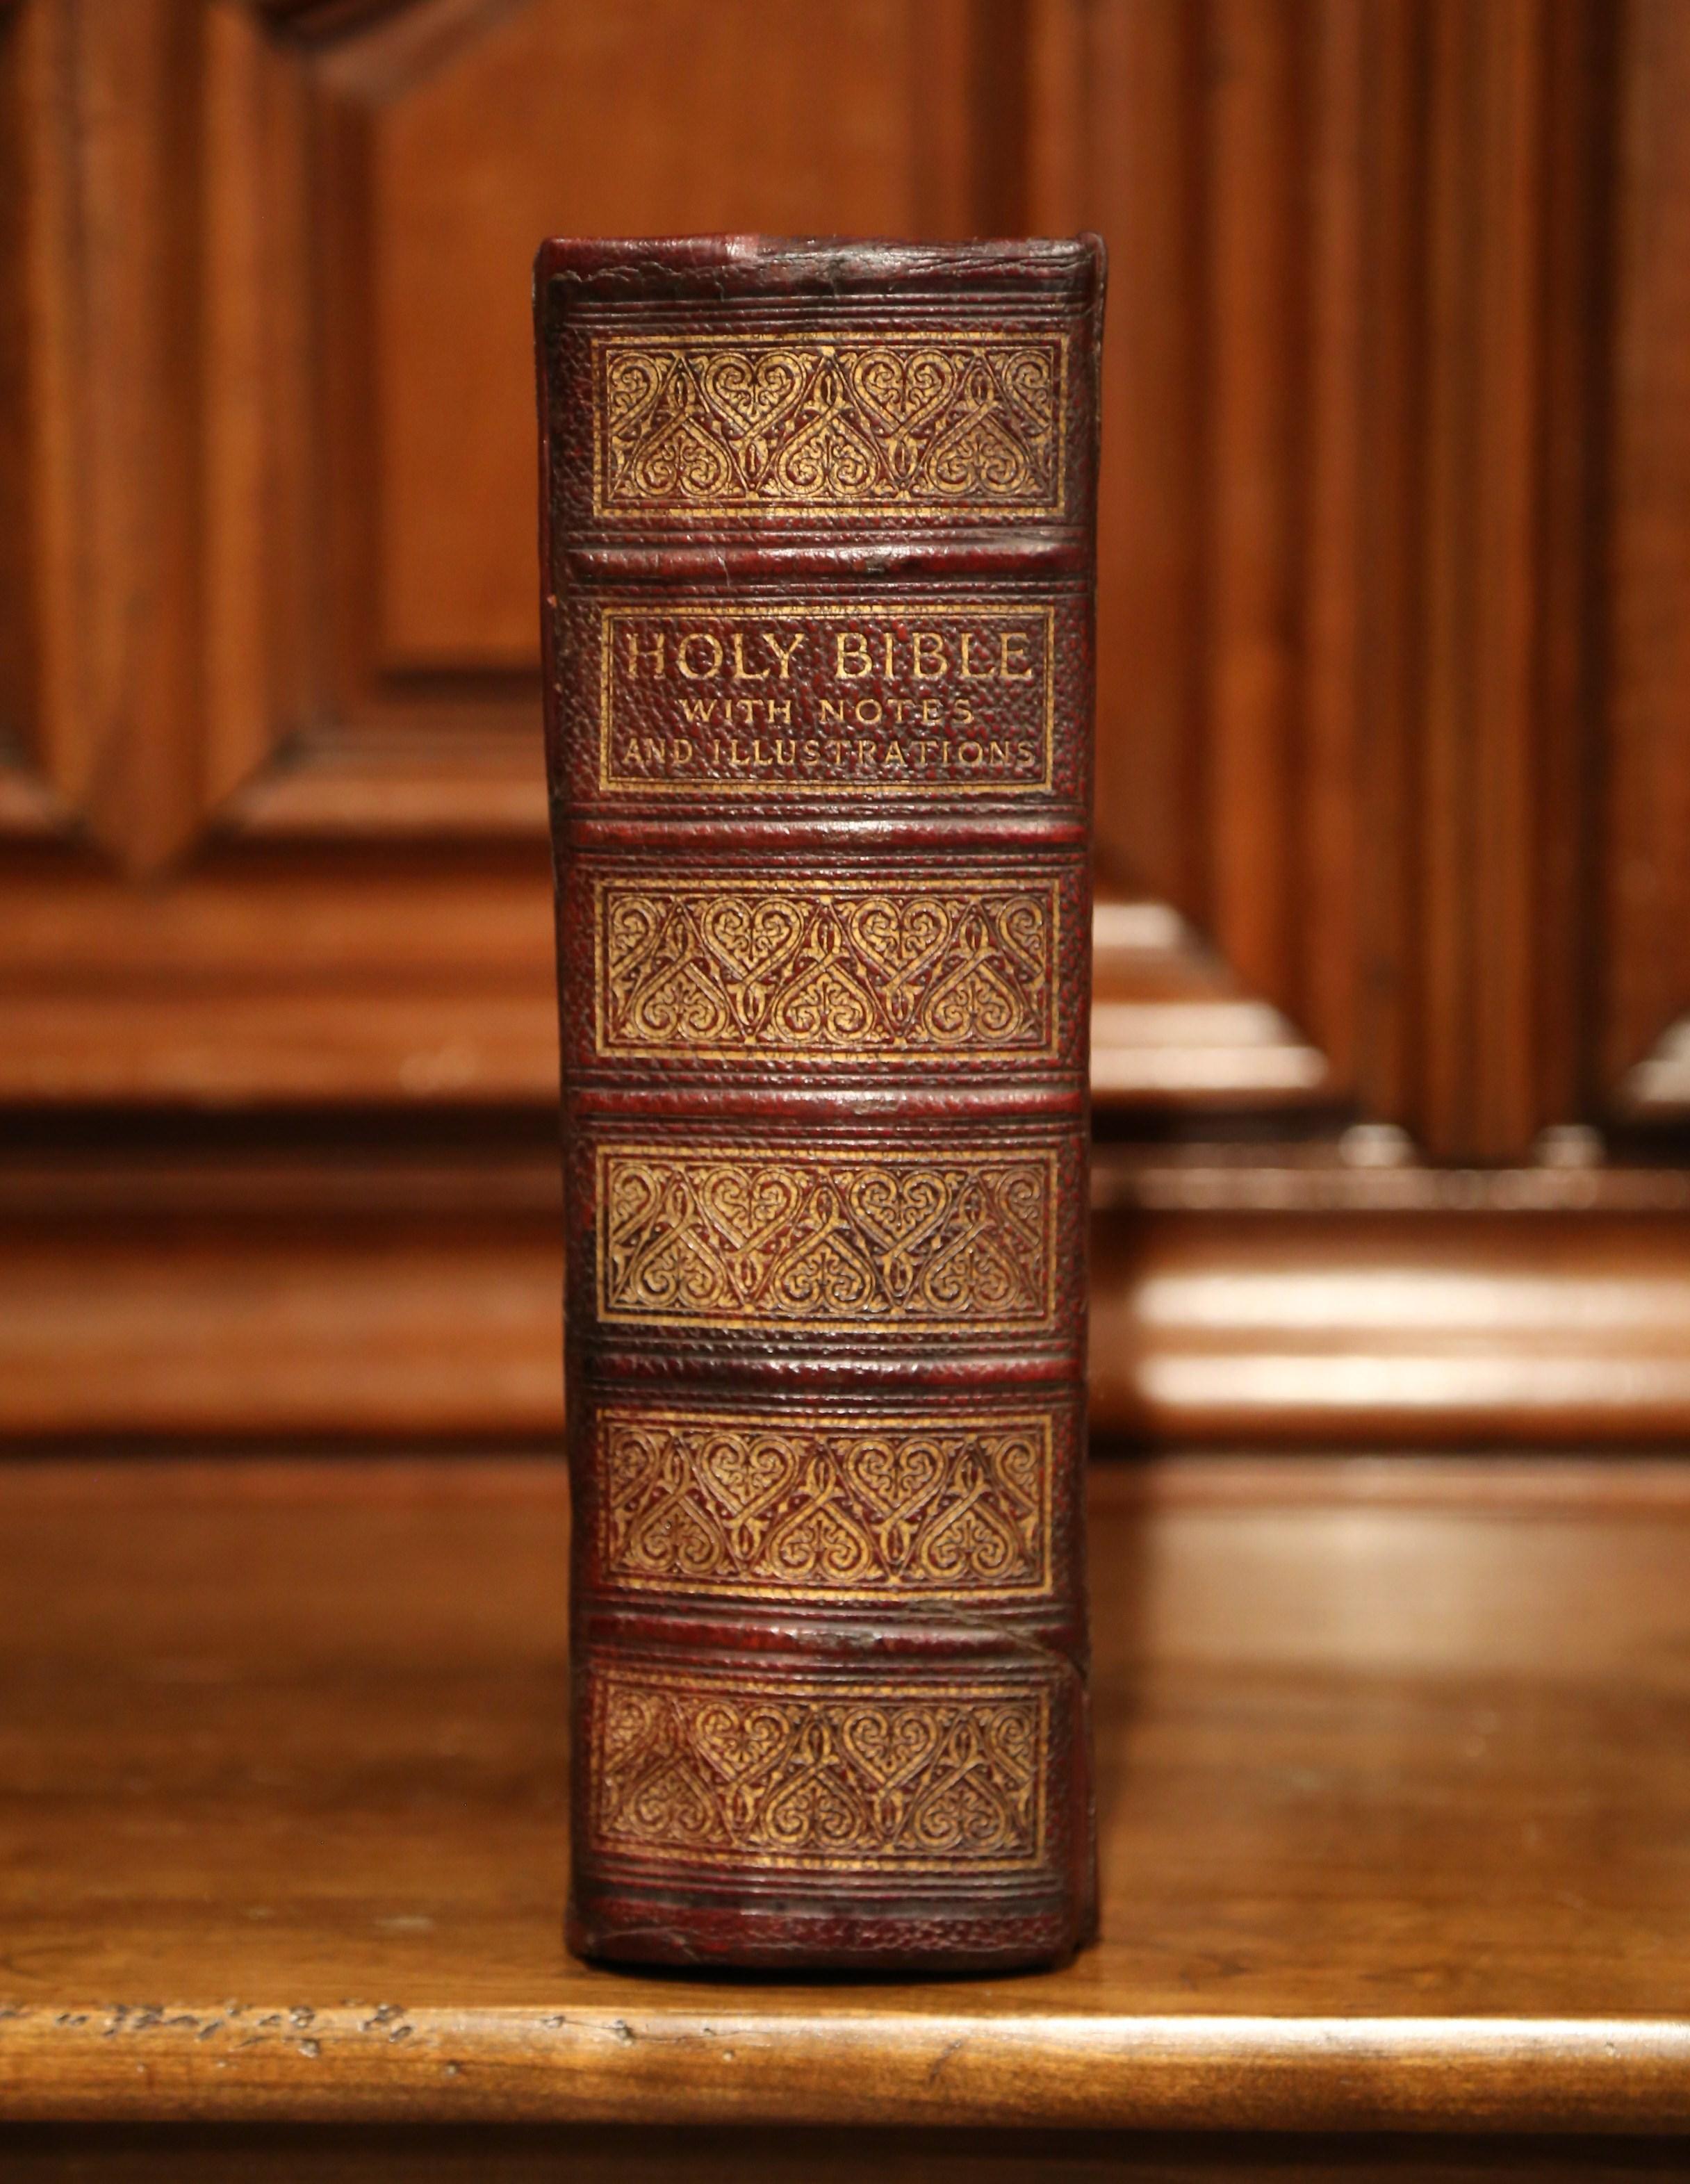 This beautiful antique bible by Rev John Brown was printed by Blackie & Son Limited in Glasgow, Edinburgh and London, circa 1880. The book flaunts an engraved brown leather and gilt covering, and is embellished with two brass locks. Inside, the